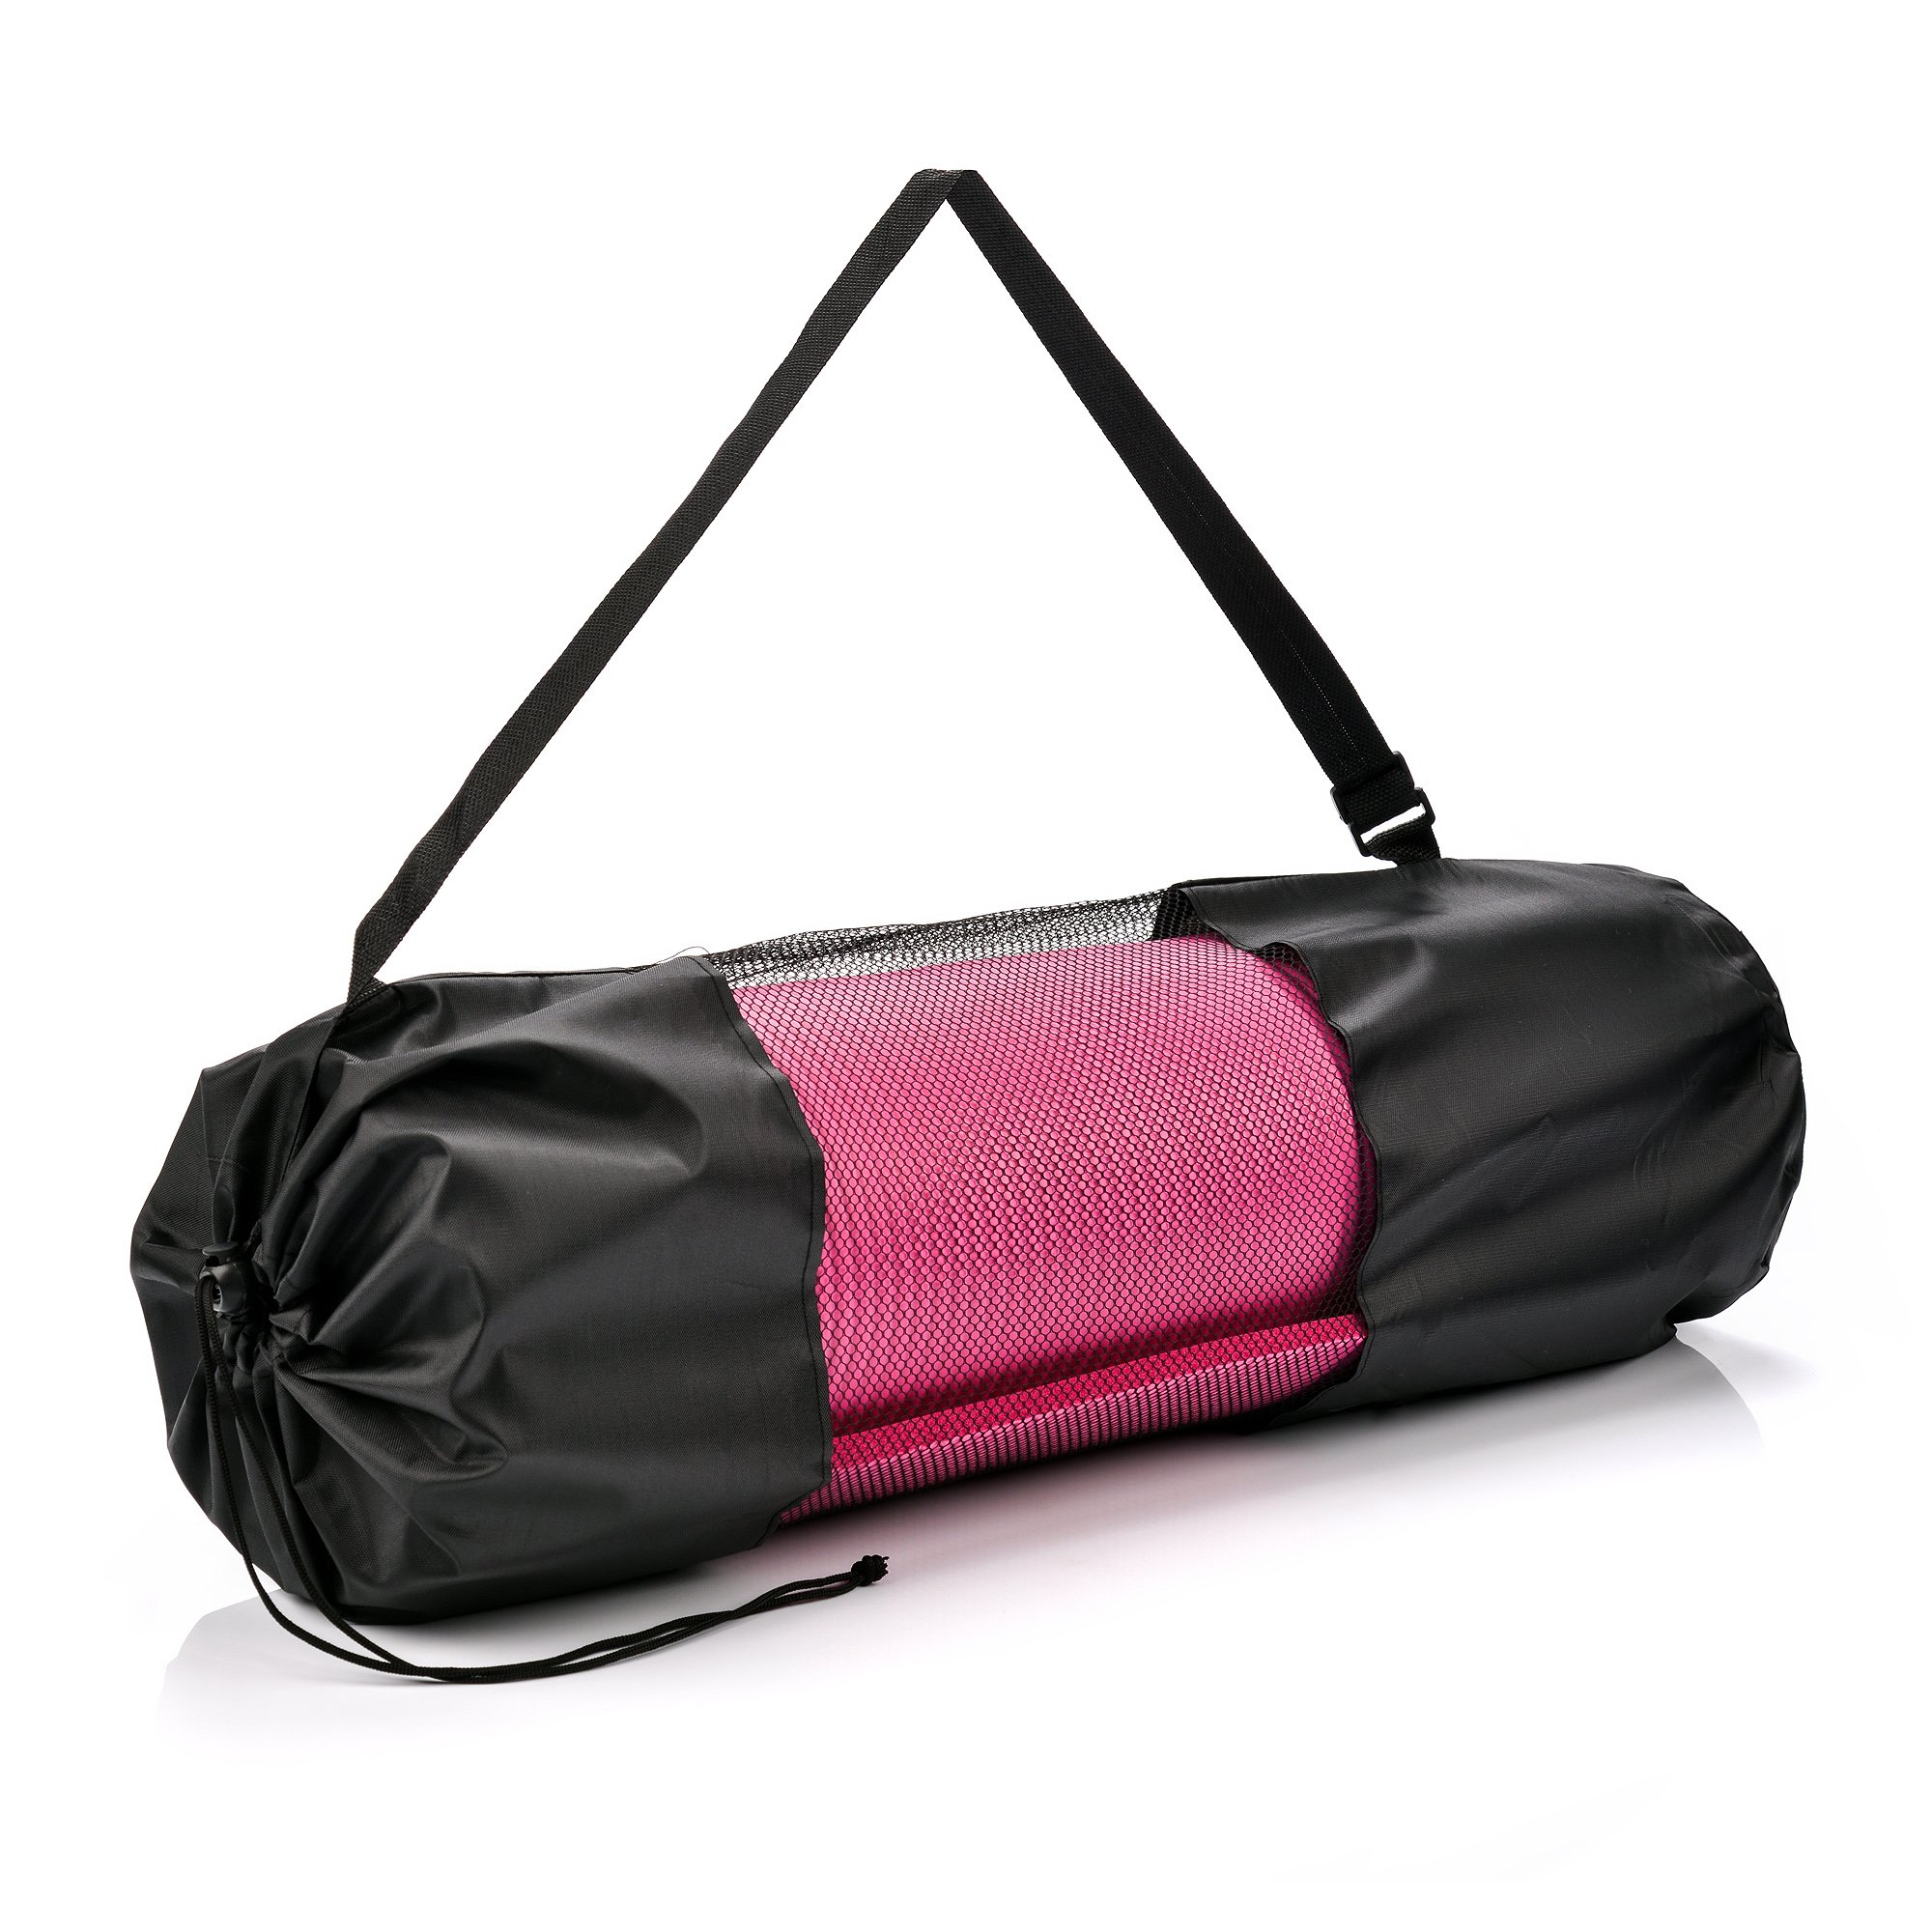 LFS Large Yoga Mat - 72x 31.5 x 2/5 inch, Extra Wide and Extra Thick Non  Slip Exercise & Fitness Yoga Mat with Band and Yoga Bag ，for All Types of  Yoga